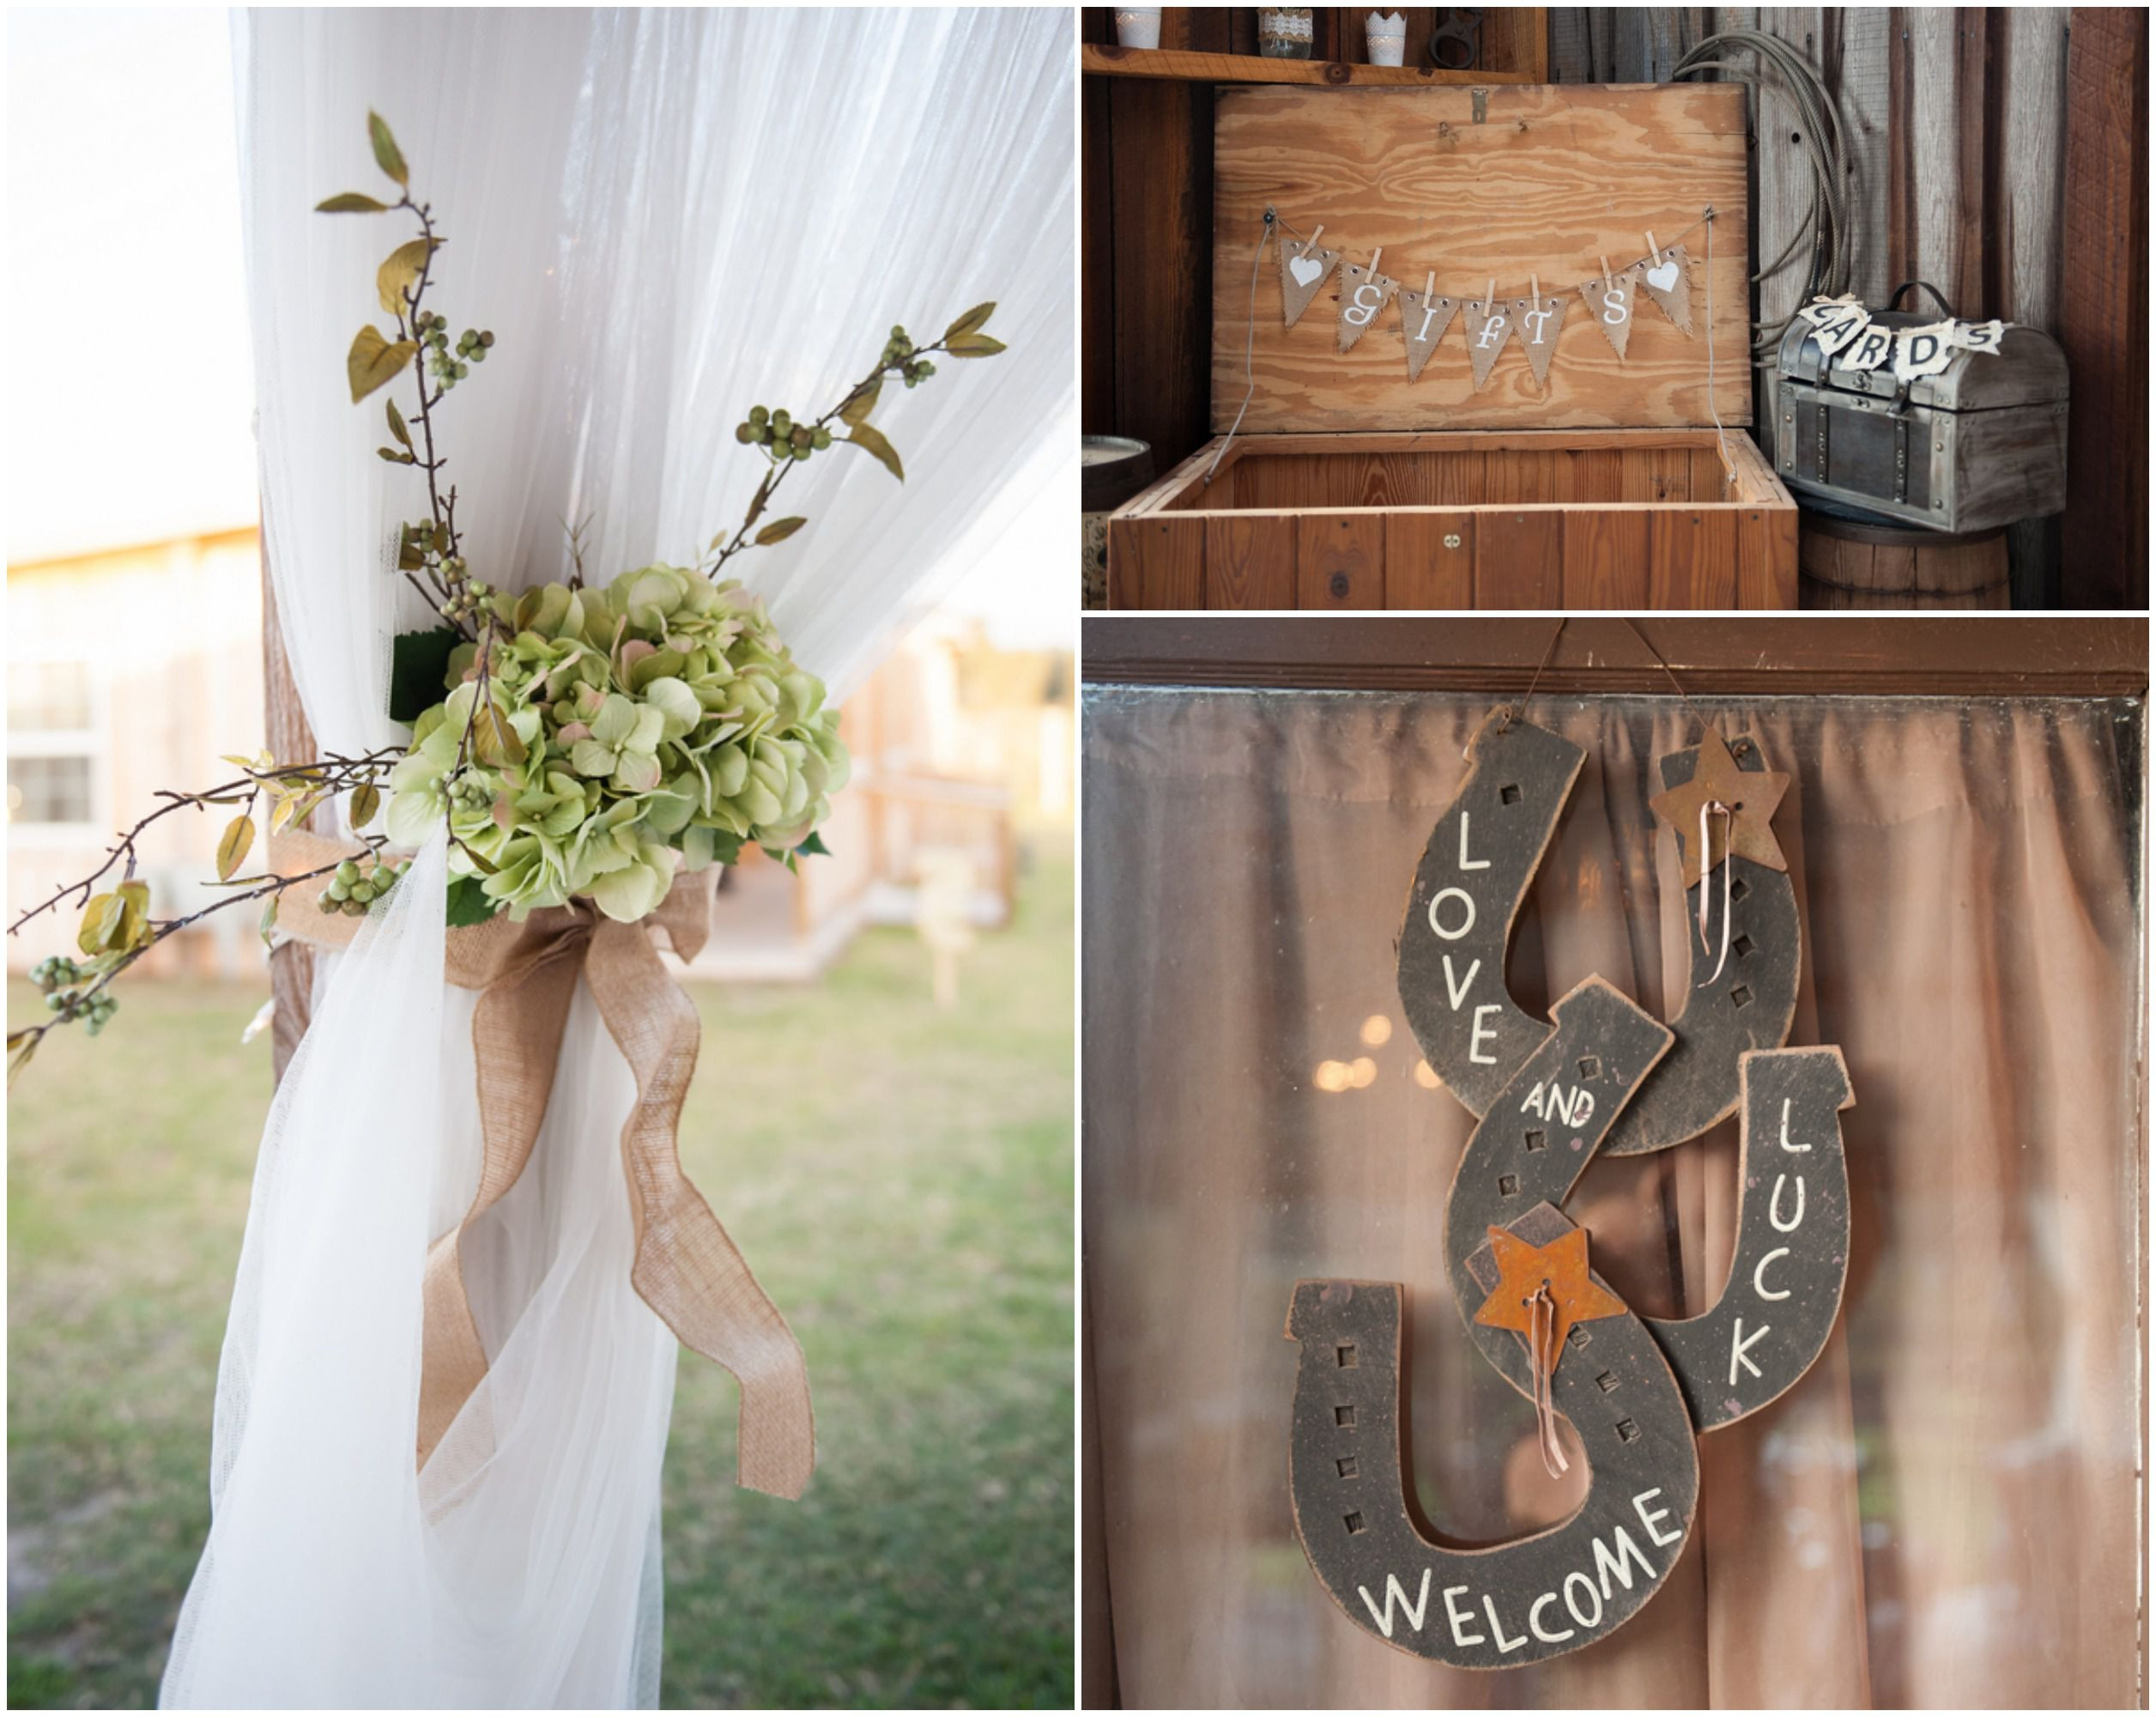 Country Engagement Party Ideas
 Barn Engagement Party Rustic Wedding Chic